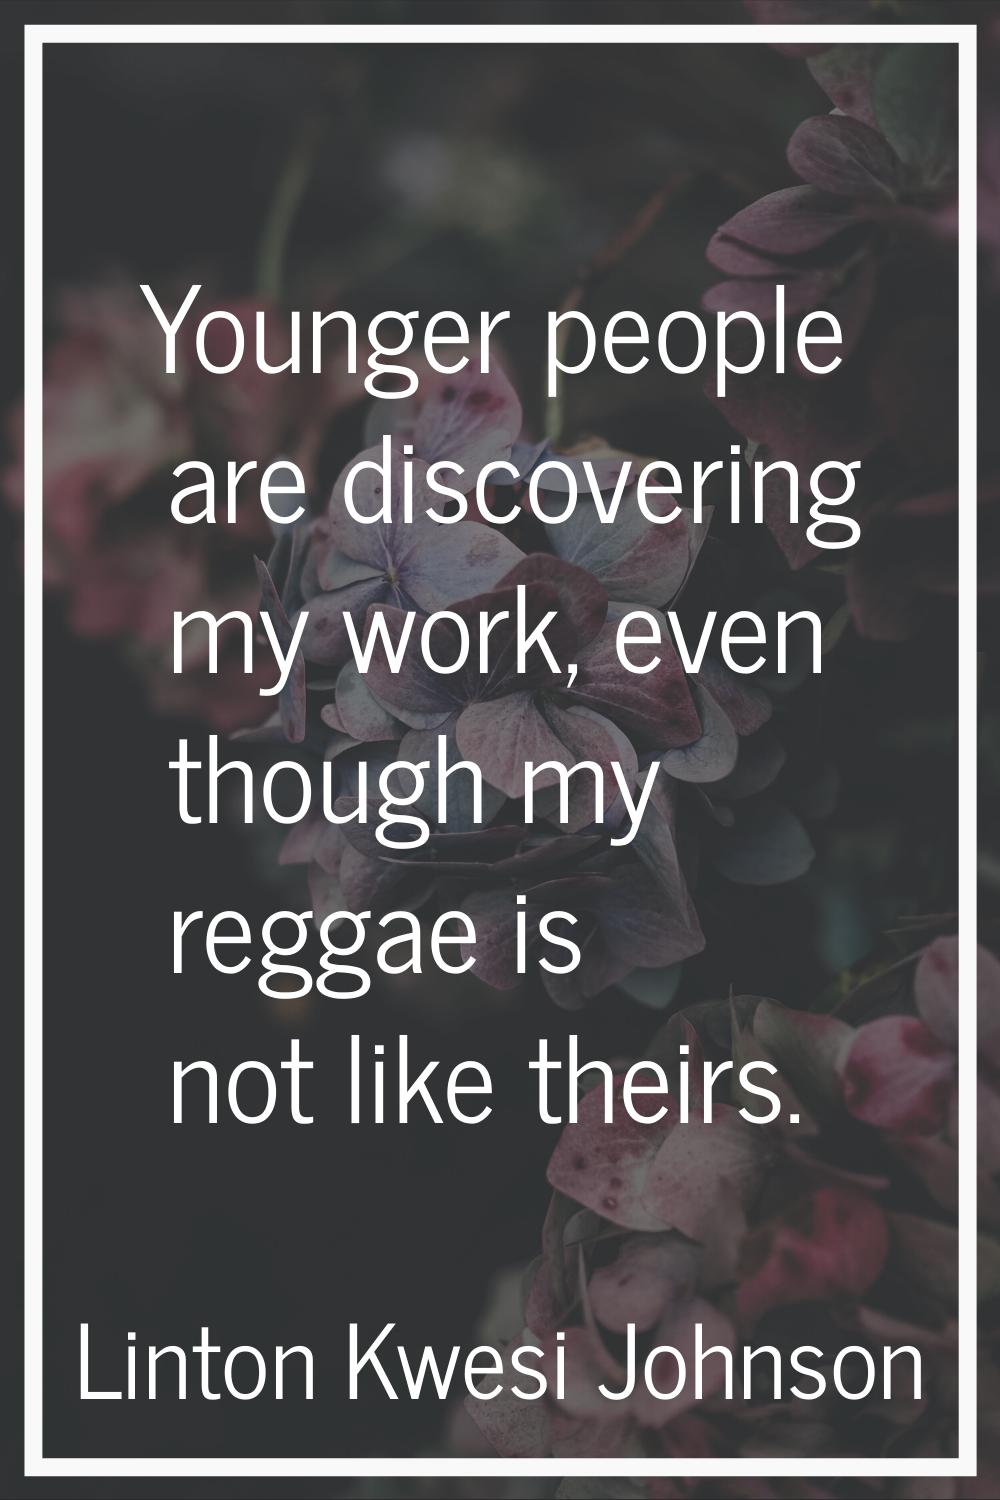 Younger people are discovering my work, even though my reggae is not like theirs.